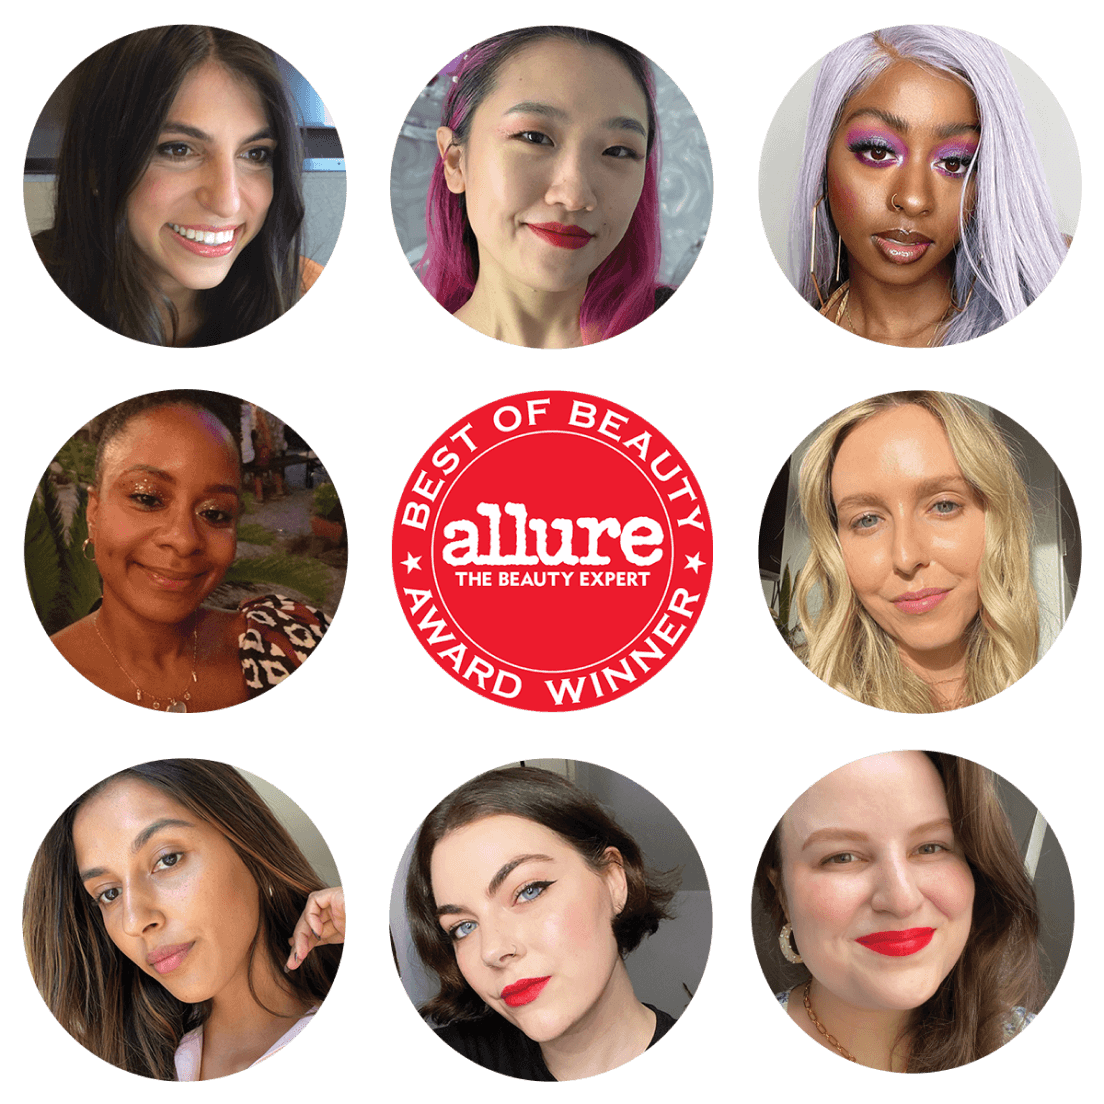 Allure logo with images of 8 female beauty experts in circles.